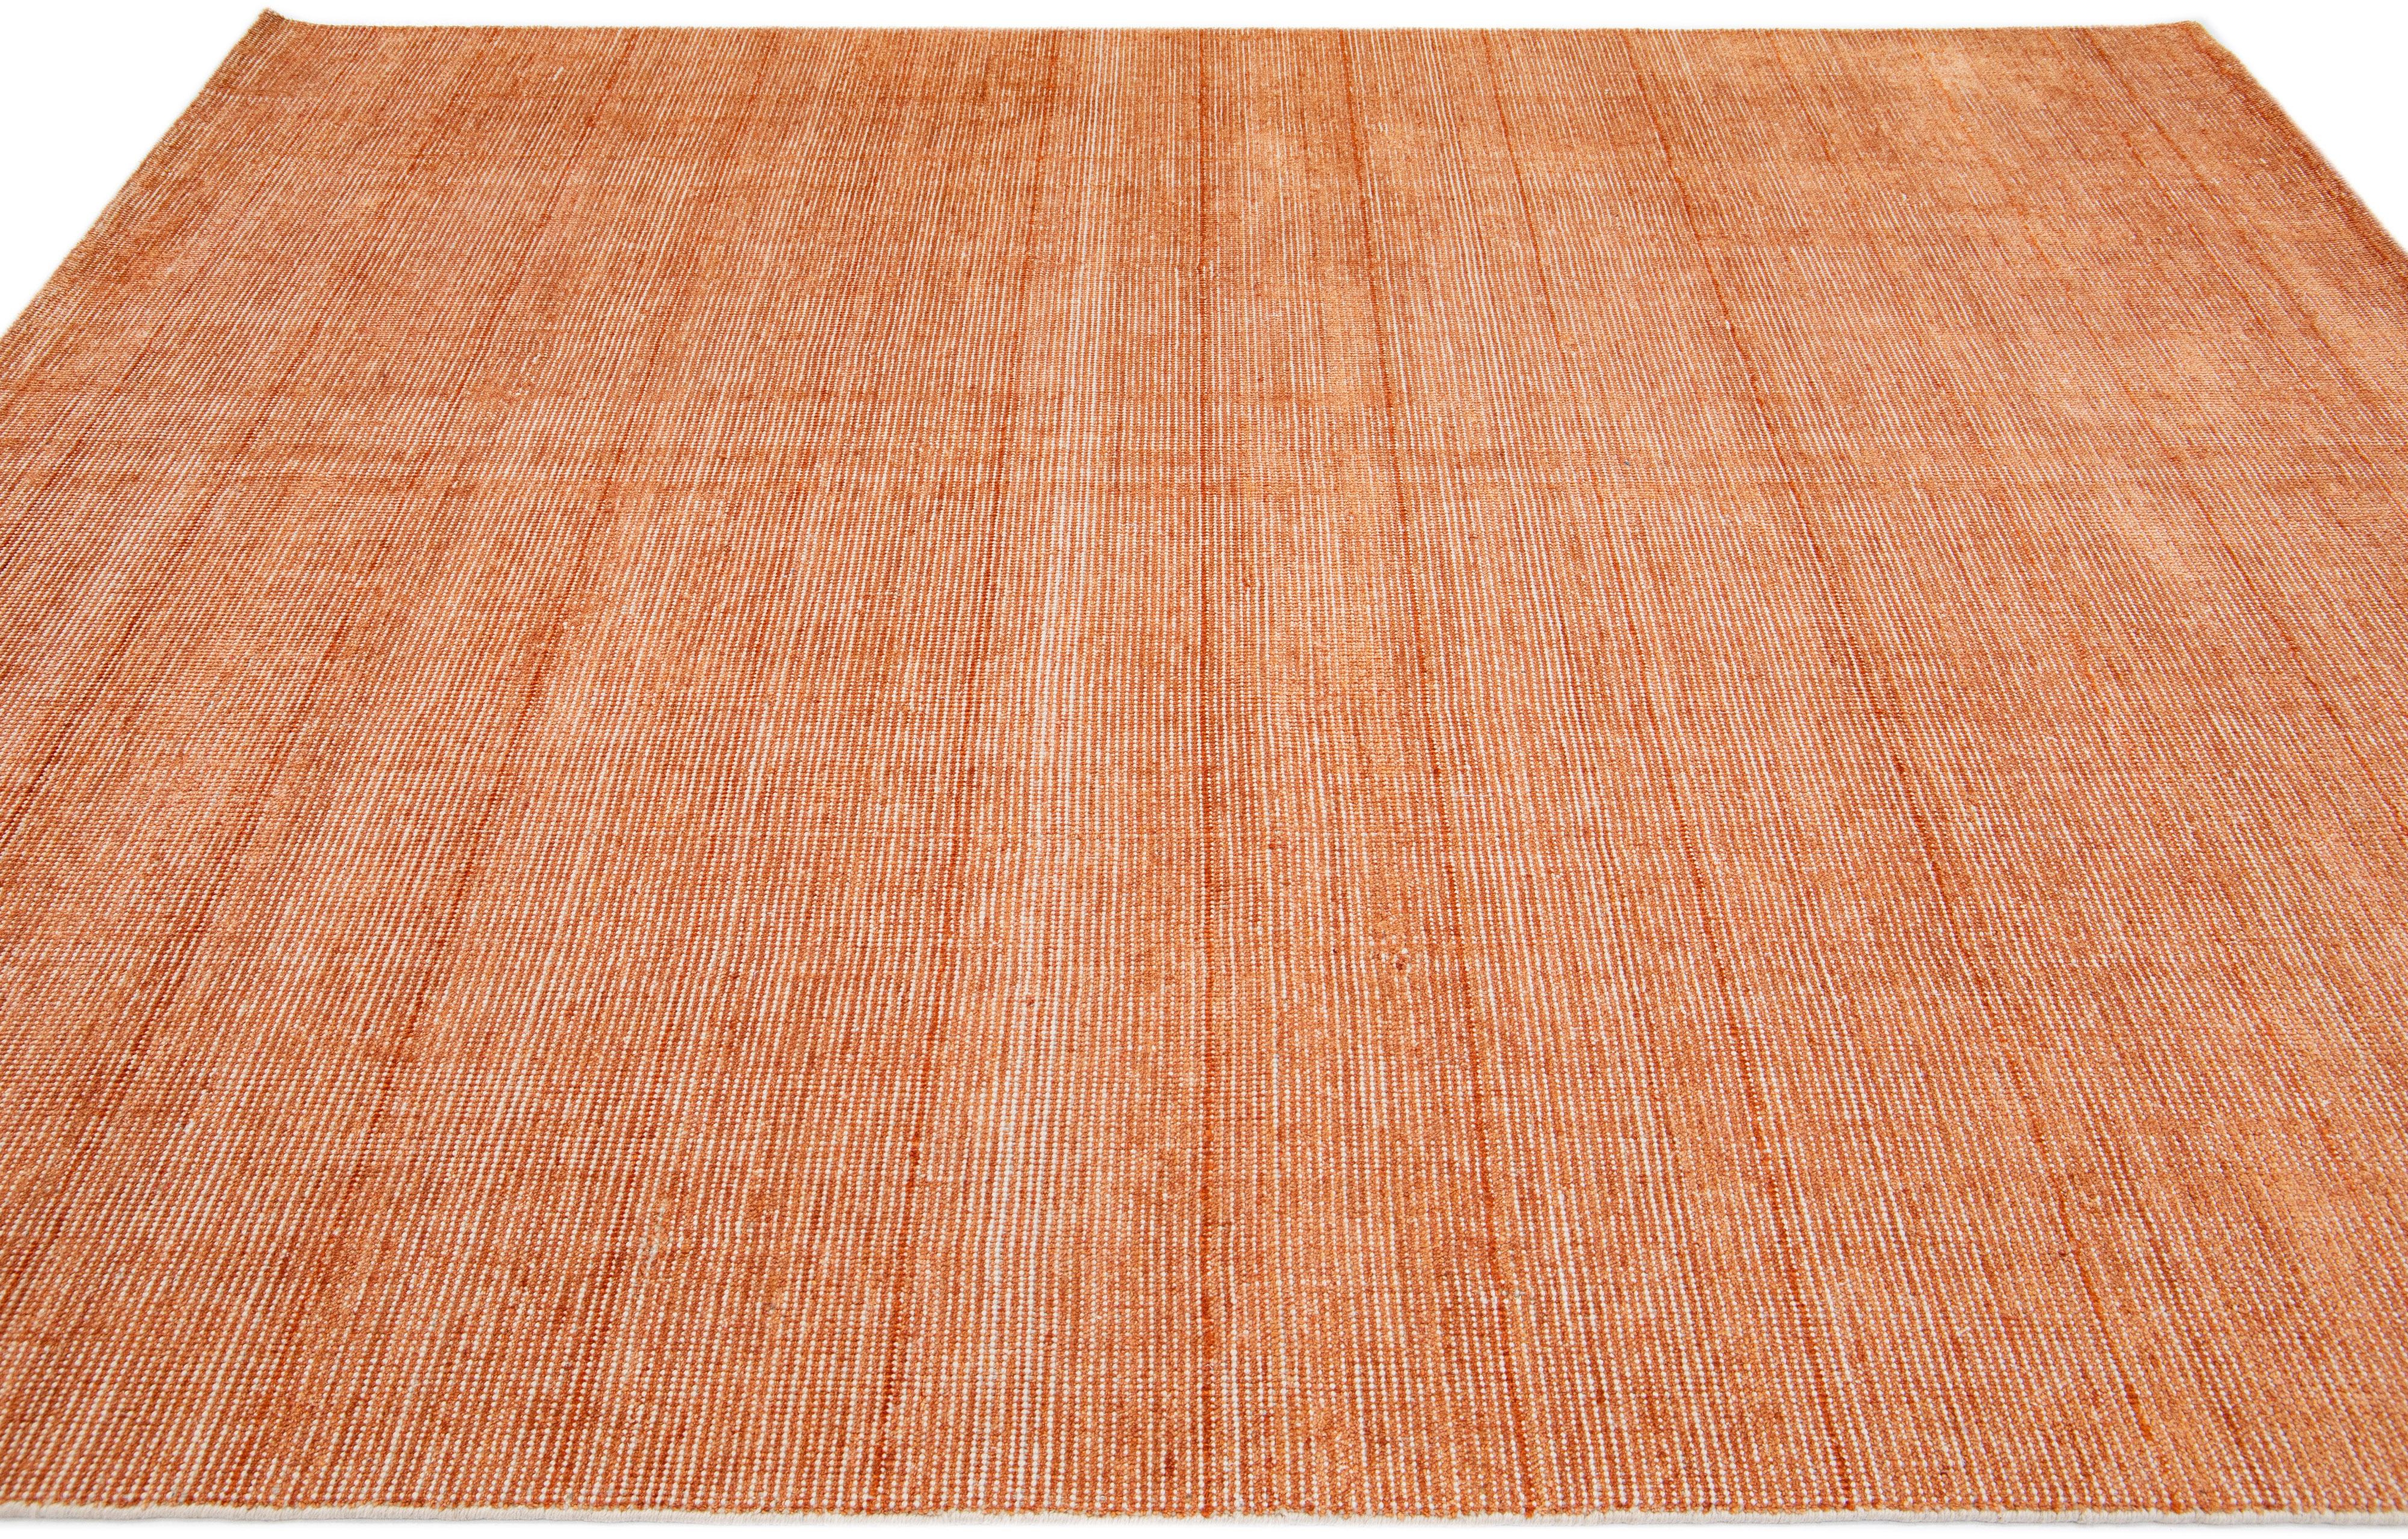 Beautiful Apadana's handmade bamboo/silk & wool Indian groove rug with an orange field. This groove collection rug has an all-over design.

This rug measures 8' x 10'.

Custom colors and sizes are available upon request.

